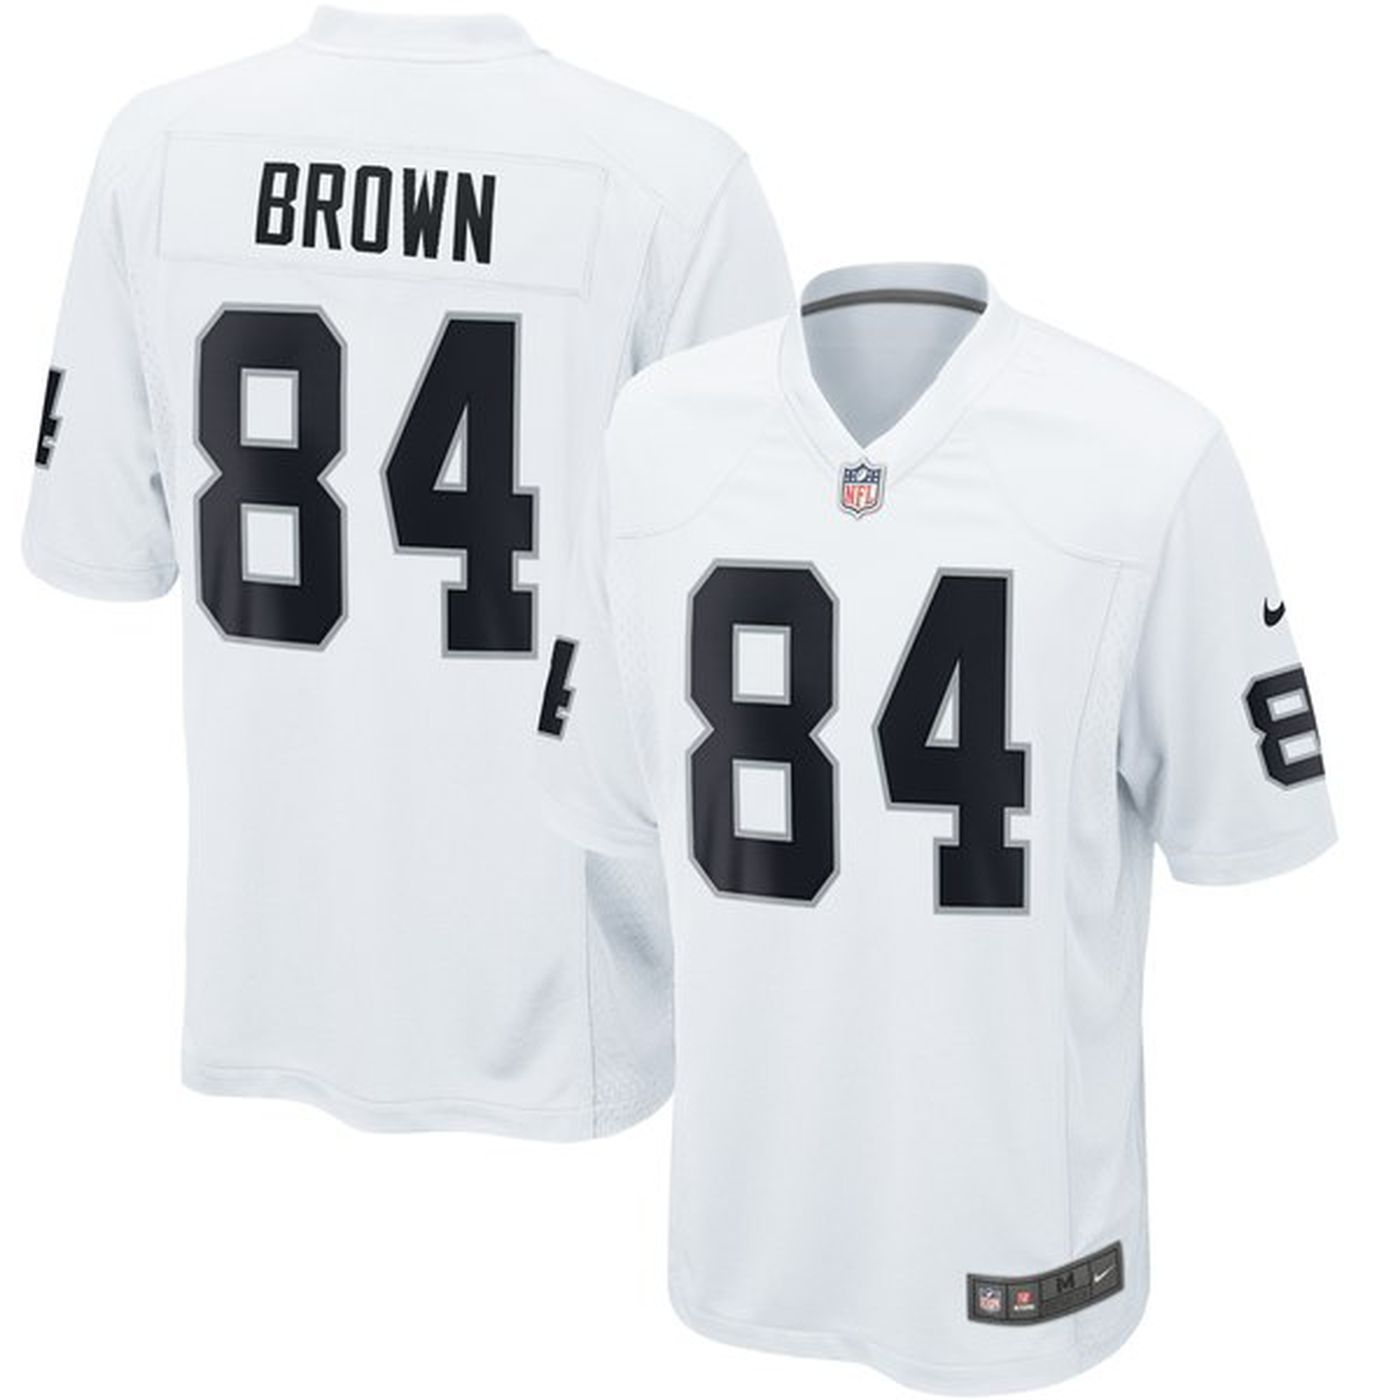 Antonio Brown Raiders jersey is now a reality and it's beautiful ...